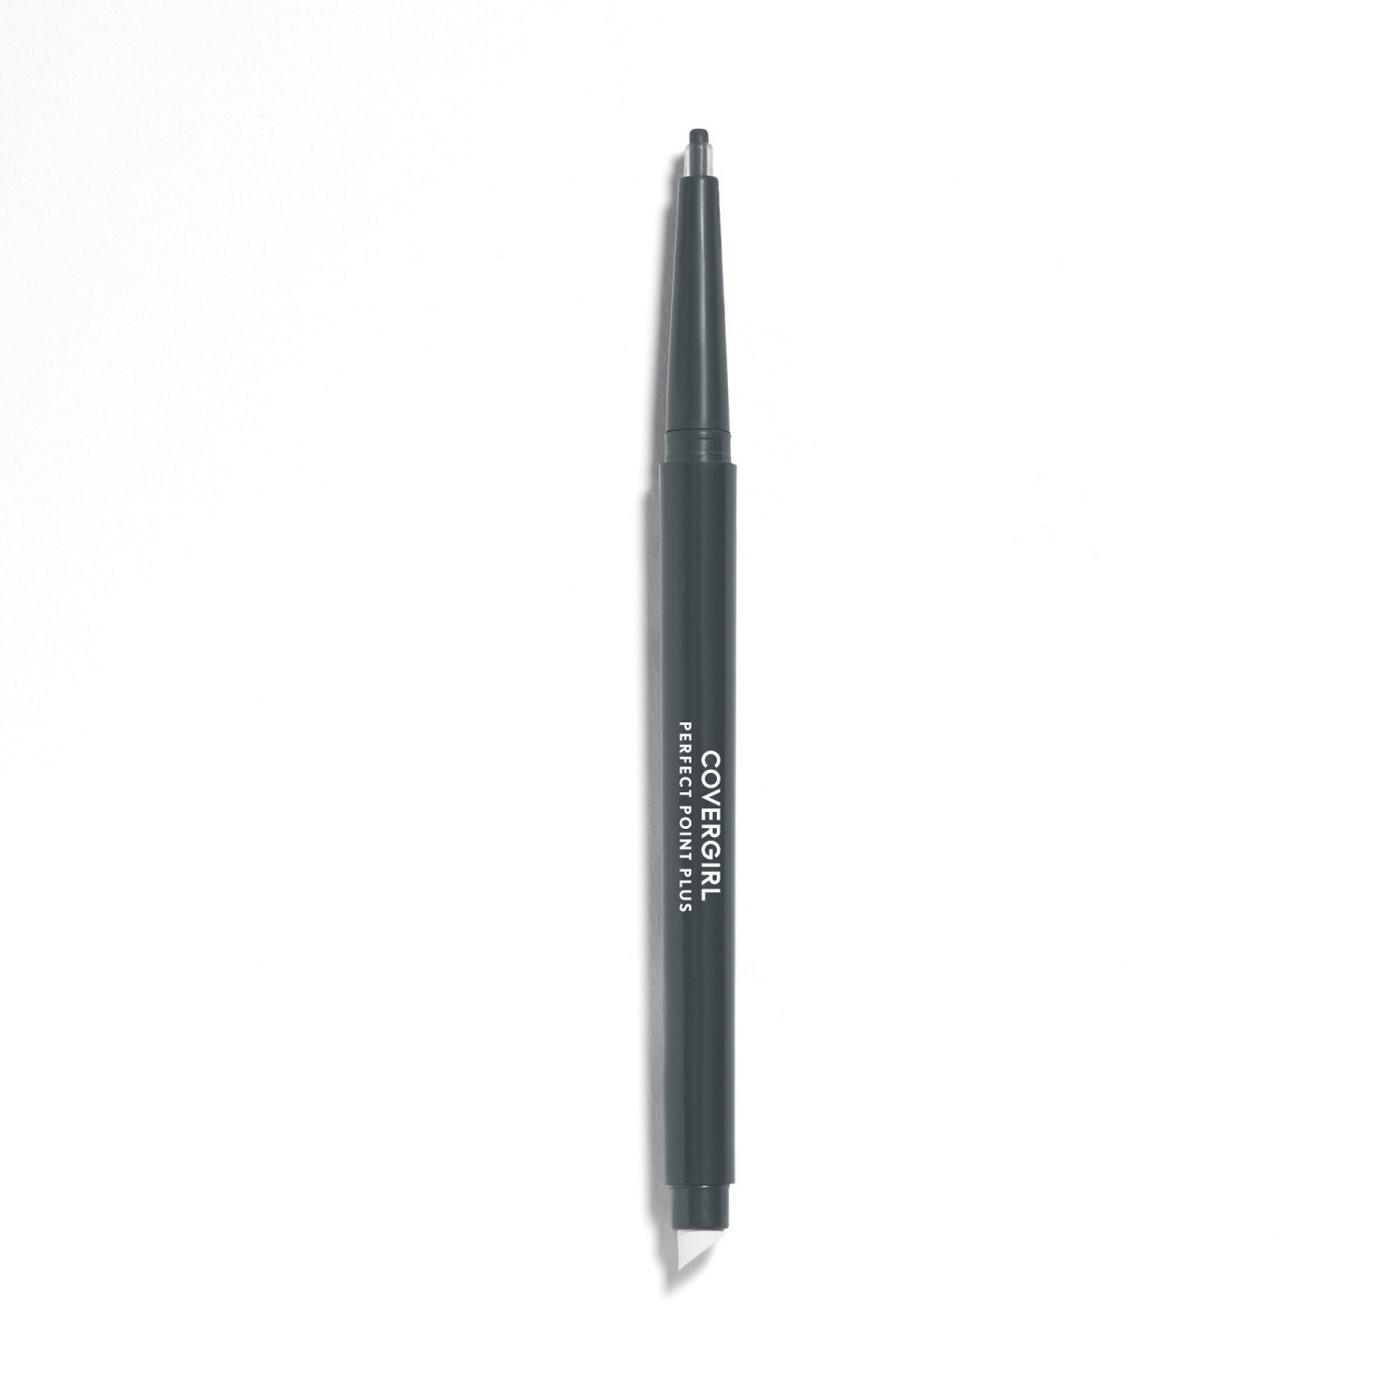 Covergirl Perfect Point Plus Eyeliner 205 Charcoal; image 2 of 3